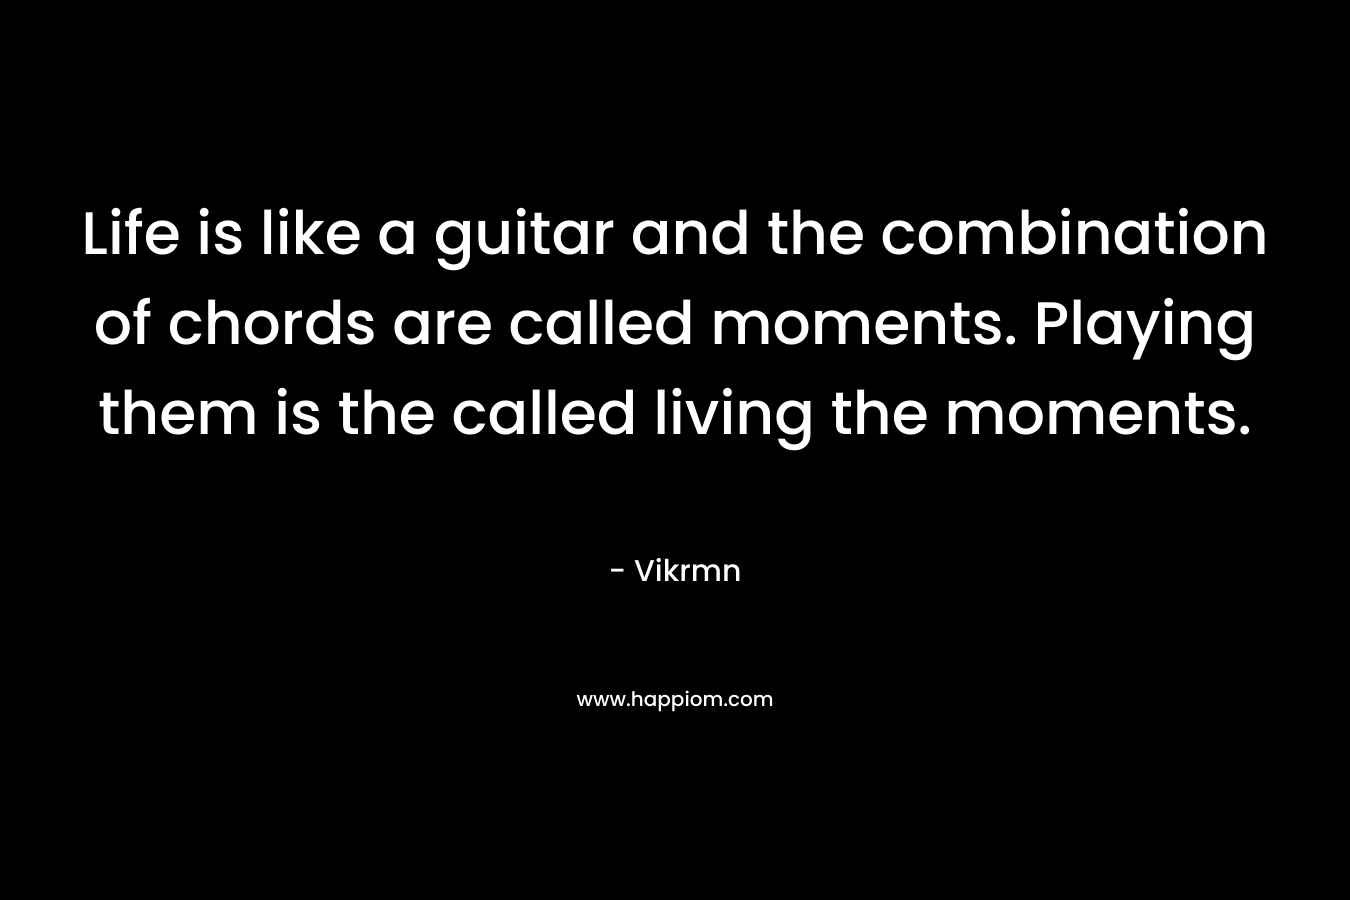 Life is like a guitar and the combination of chords are called moments. Playing them is the called living the moments. – Vikrmn